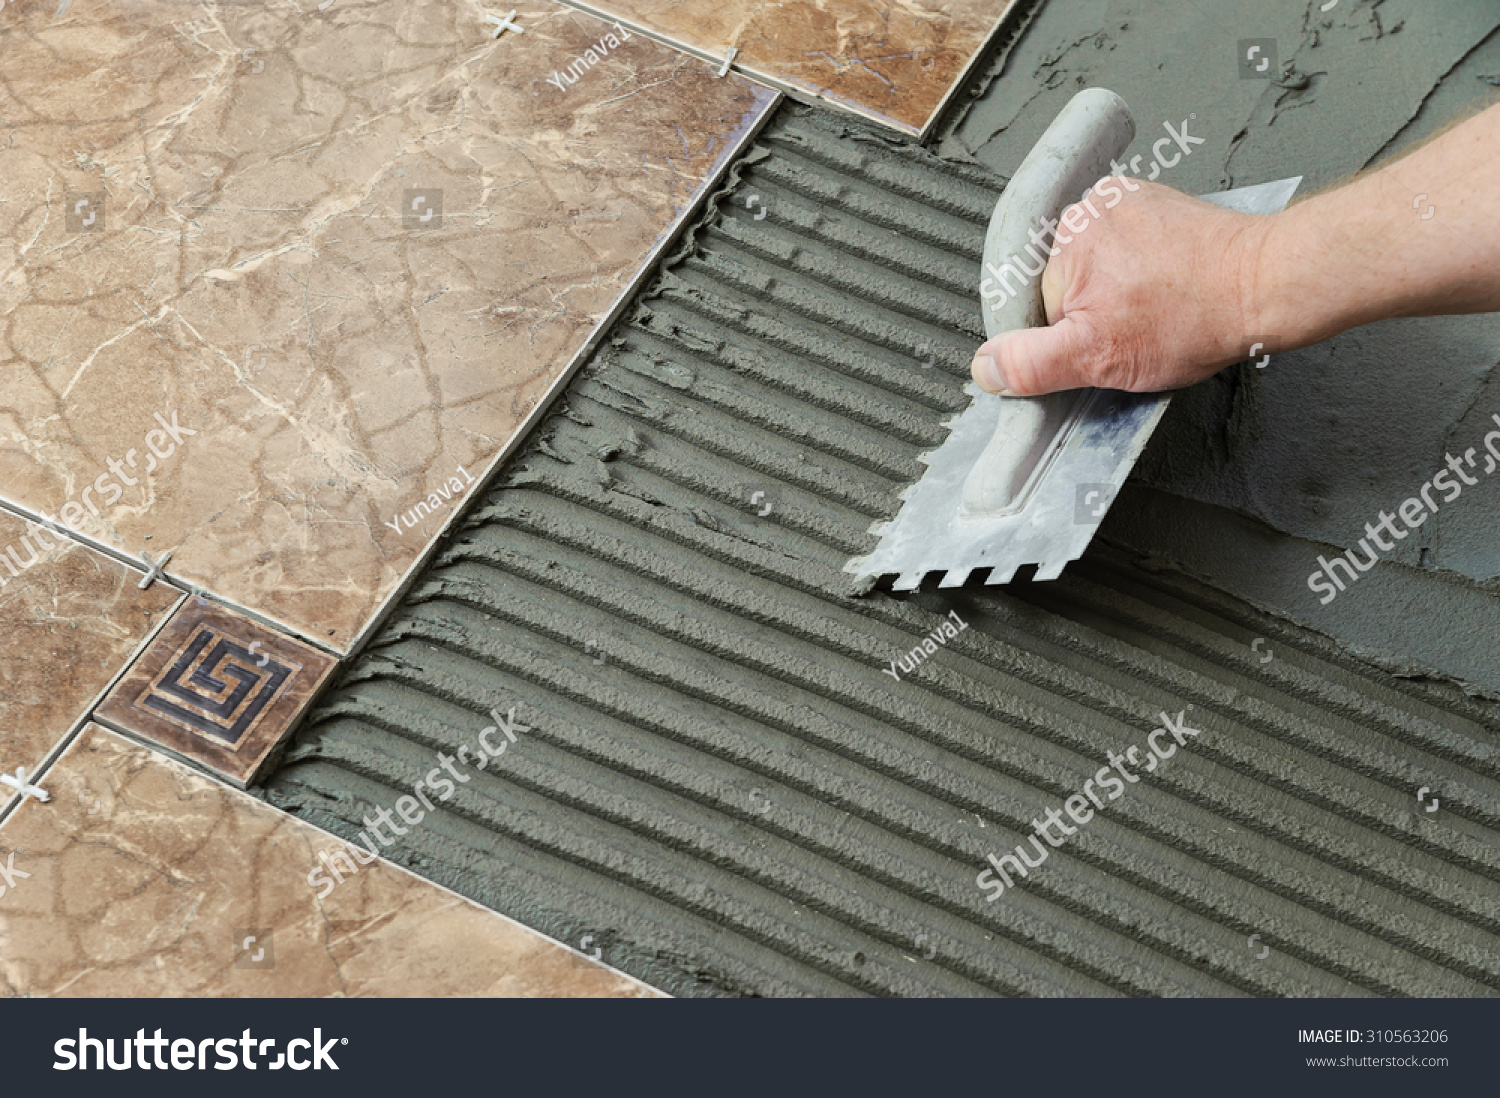 Laying Ceramic Tiles Troweling Adhesive Onto Stock Photo Edit Now